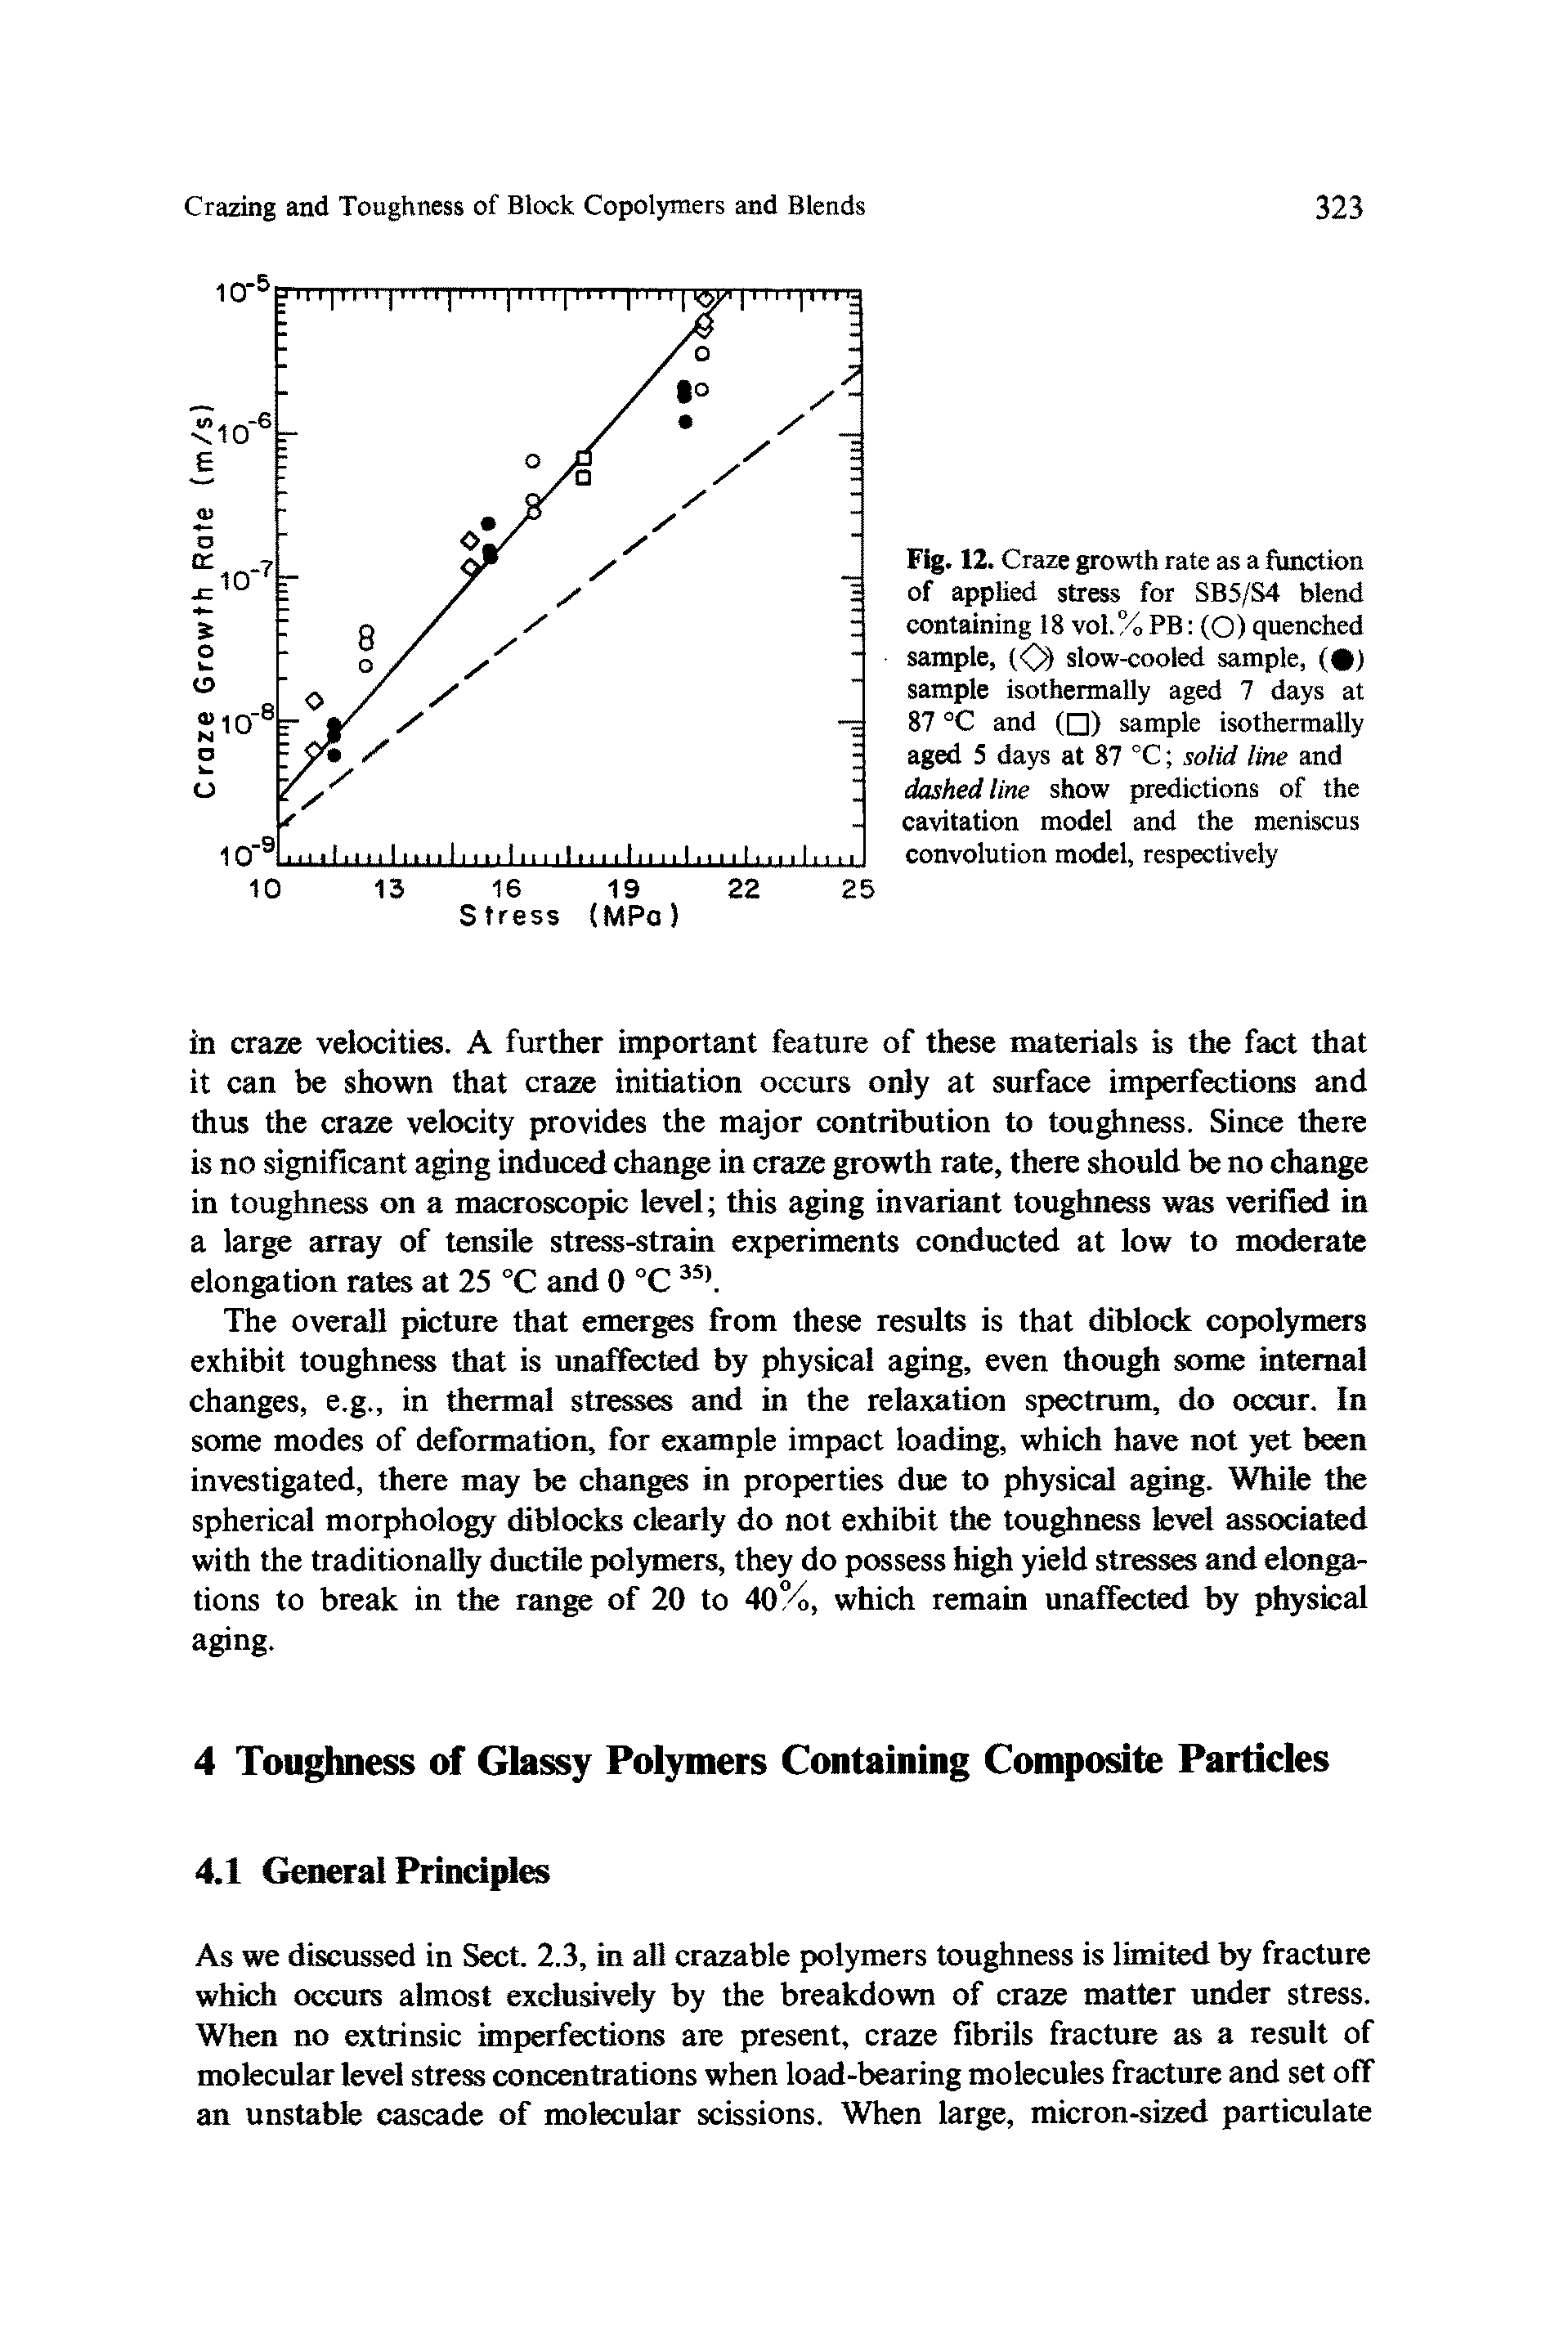 Fig. 12. Craze growth rate as a function of applied stress for SB5/S4 blend containing 18 vol.% PB (O) quenched sample, (O) slow-cooled sample, ( ) sample isothermally aged 7 days at 87 °C and ( ) sample isothermally aged 5 days at 87 °C solid line and dashed line show predictions of the cavitation model and the meniscus convolution model, respectively...